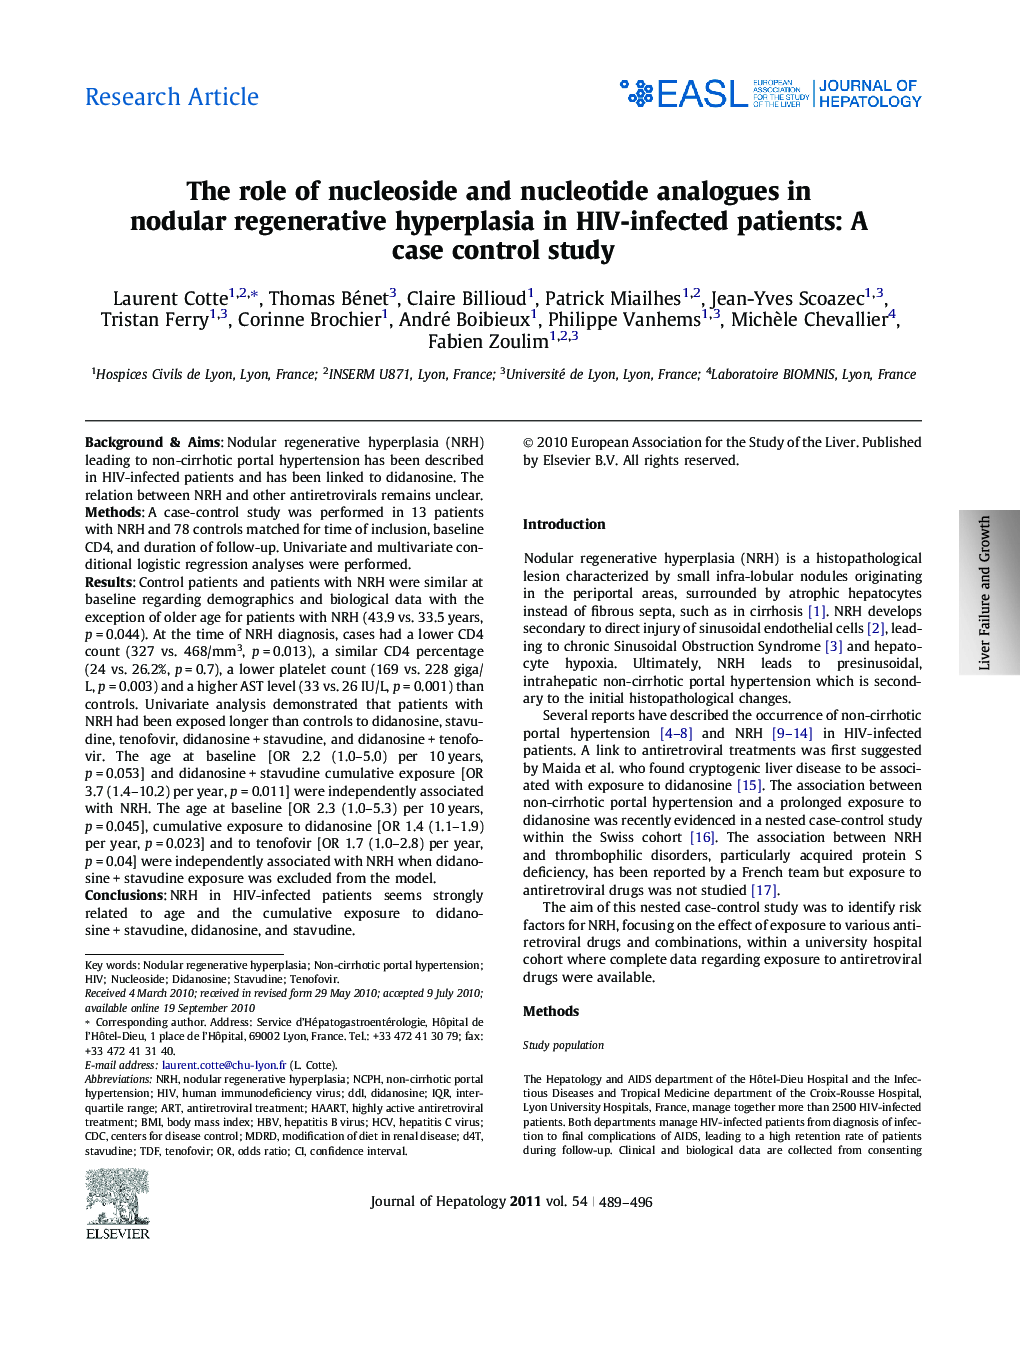 Research ArticleThe role of nucleoside and nucleotide analogues in nodular regenerative hyperplasia in HIV-infected patients: A case control study